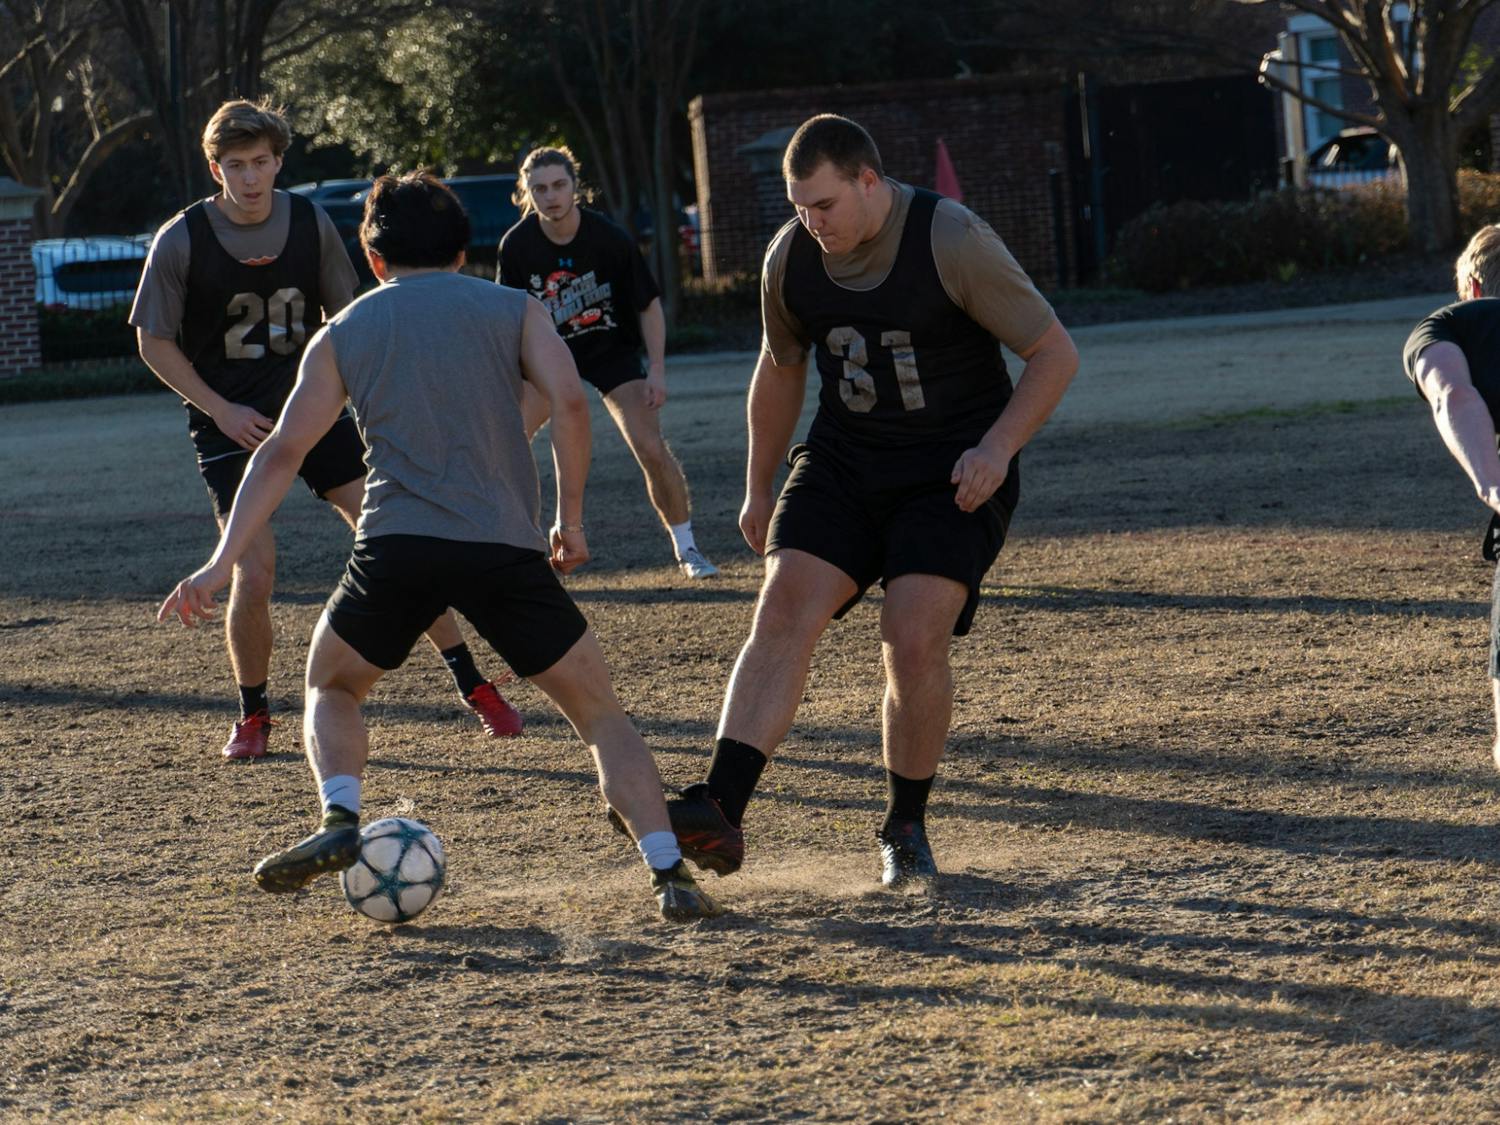 Group of USC students play intramural soccer on Sunday, Feb. 20, 2022. USC hosts a wide variety of intramural sports providing ways for students to get exercise and competition outside of collegiate sports and clubs.